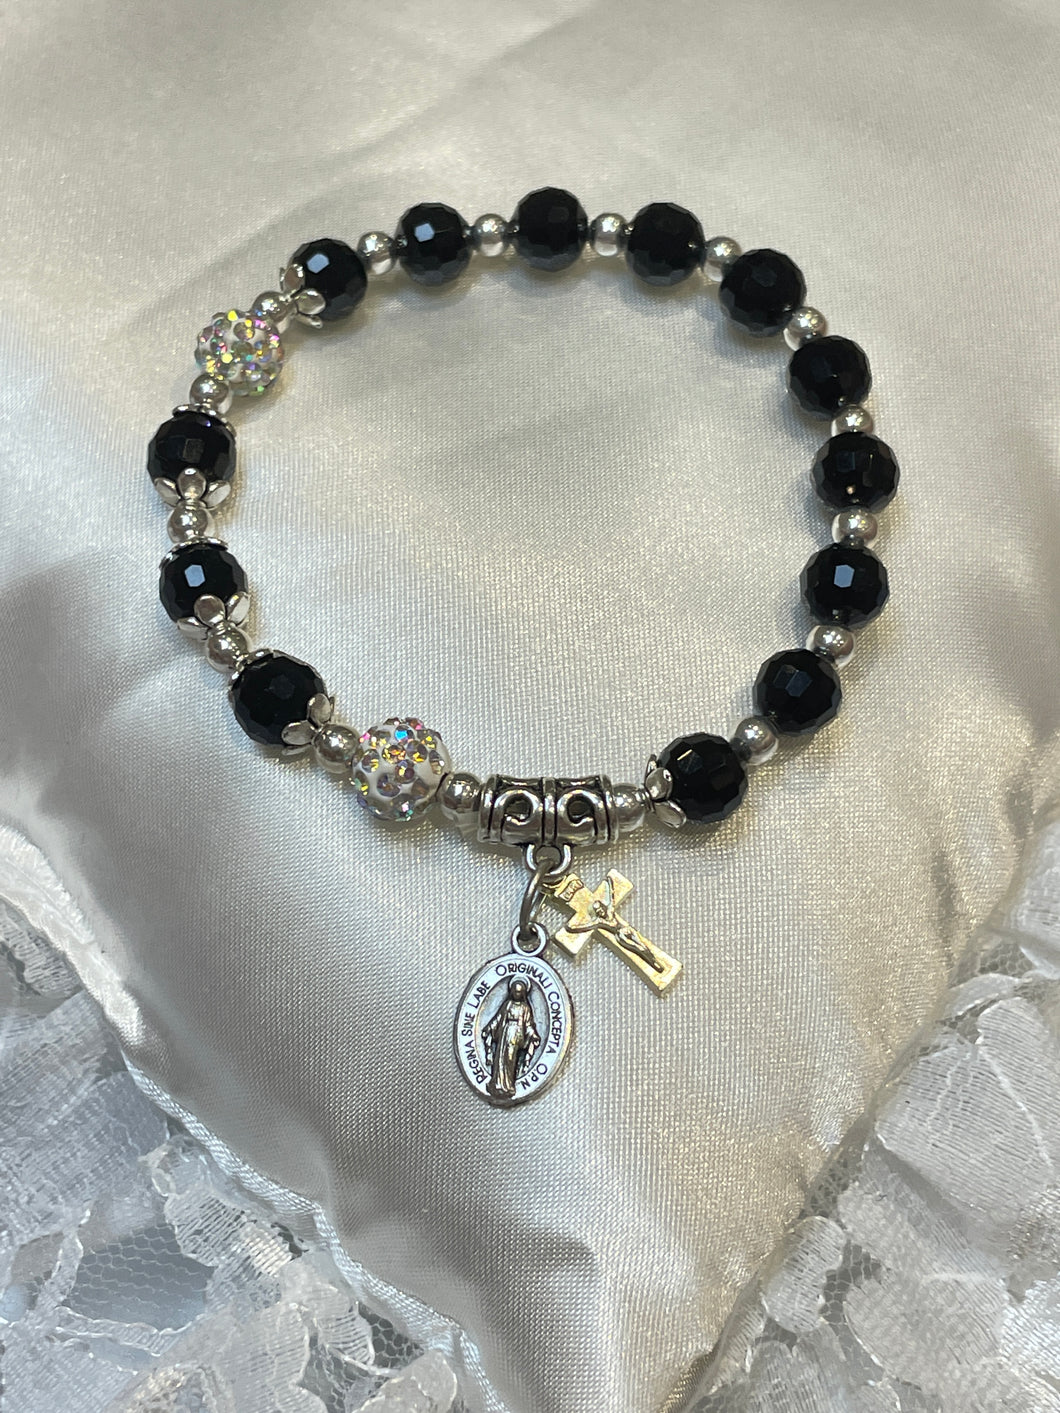 Black Crystal Rosary Bracelet with Miraculous Medal and Crucifix Charms